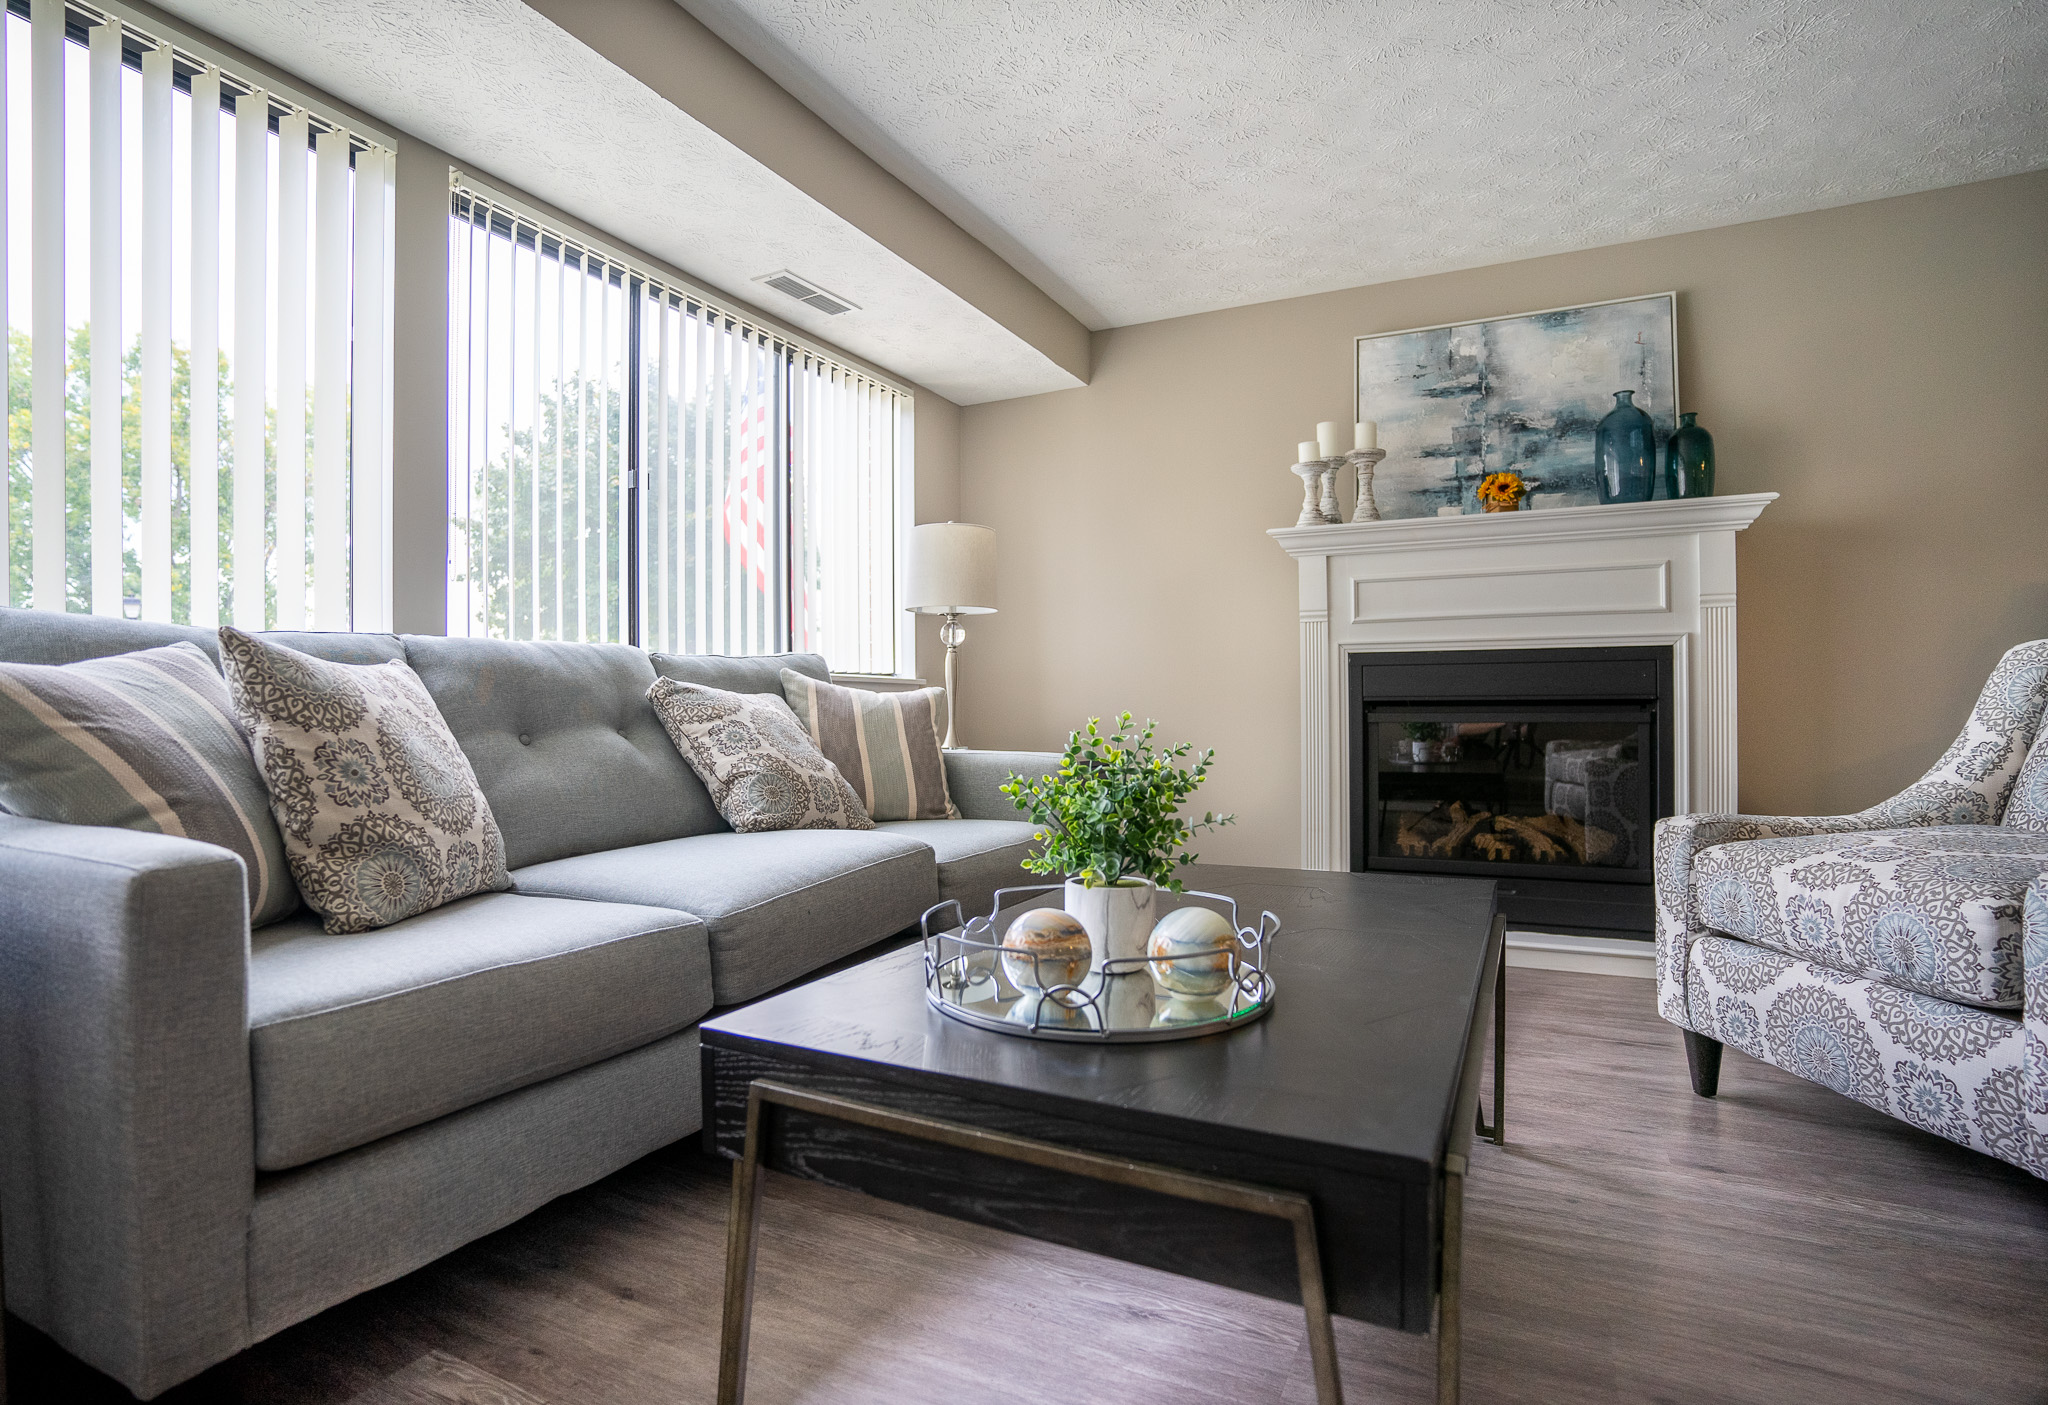 Updated Interiors at Willow Pond Apartments